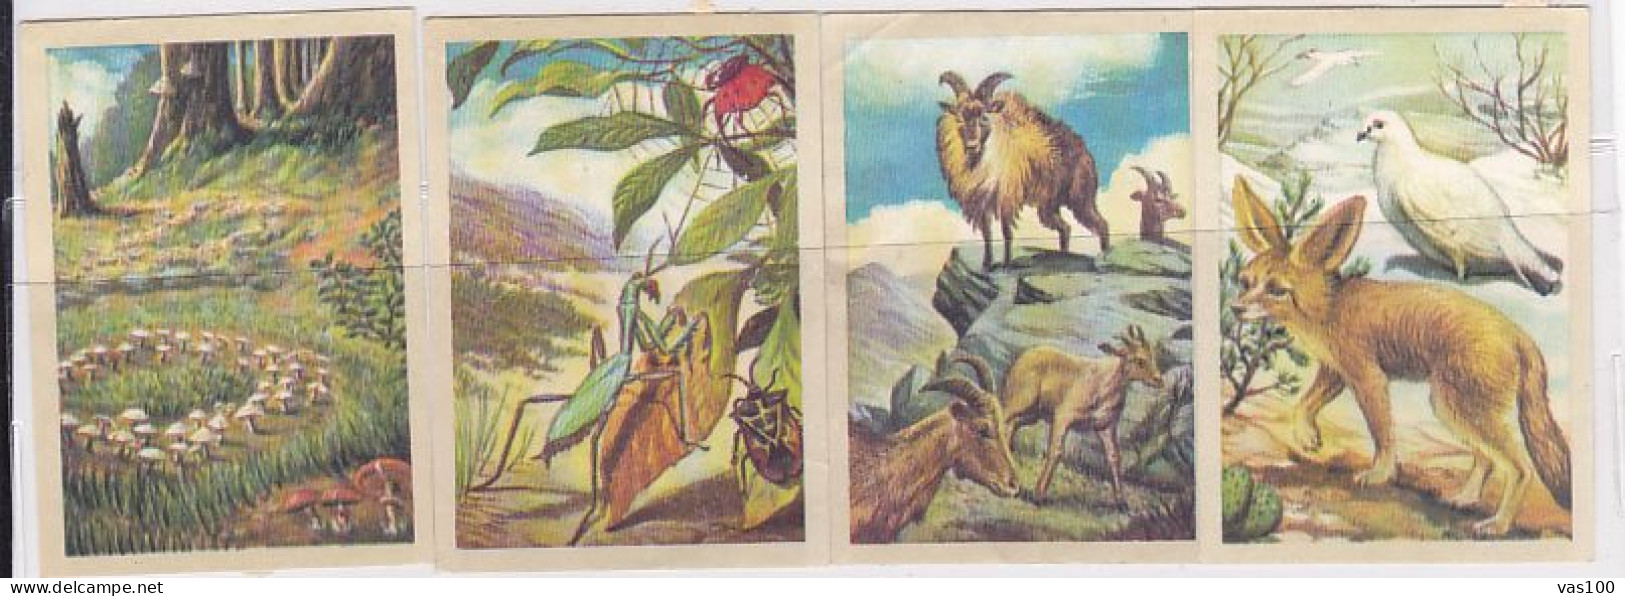 TRADE CARDS, CHOCOLATE, JACQUES, MUSHROOMS, INSECTS, ANIMALS, BIRD, 4X - Jacques